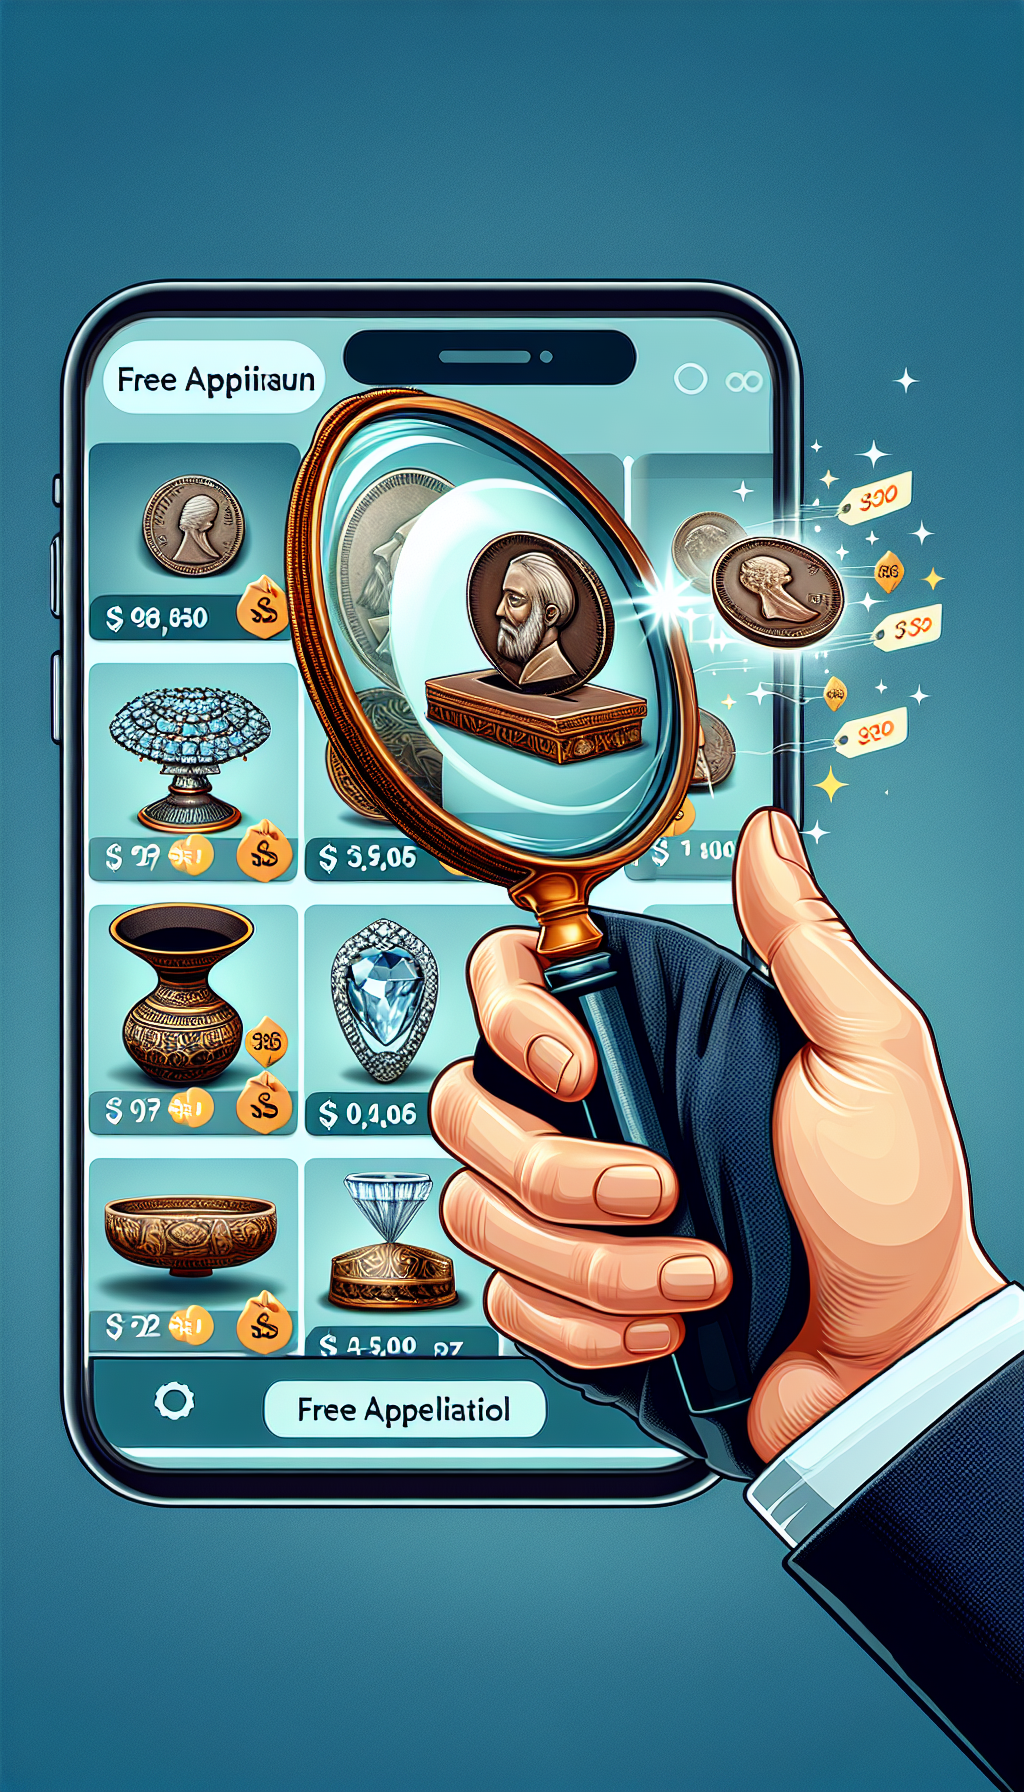 An animated hand holds a vintage magnifying glass, through which a smartphone screen is visible, displaying a "Free Appraisal" app interface with a queue of antiques. Coins, vases, and jewelry sparkle with price tags floating above. The blend of old-world items and modern technology conveys instant antique evaluation, encapsulating the seamless bridge between past treasures and present-day tech convenience.